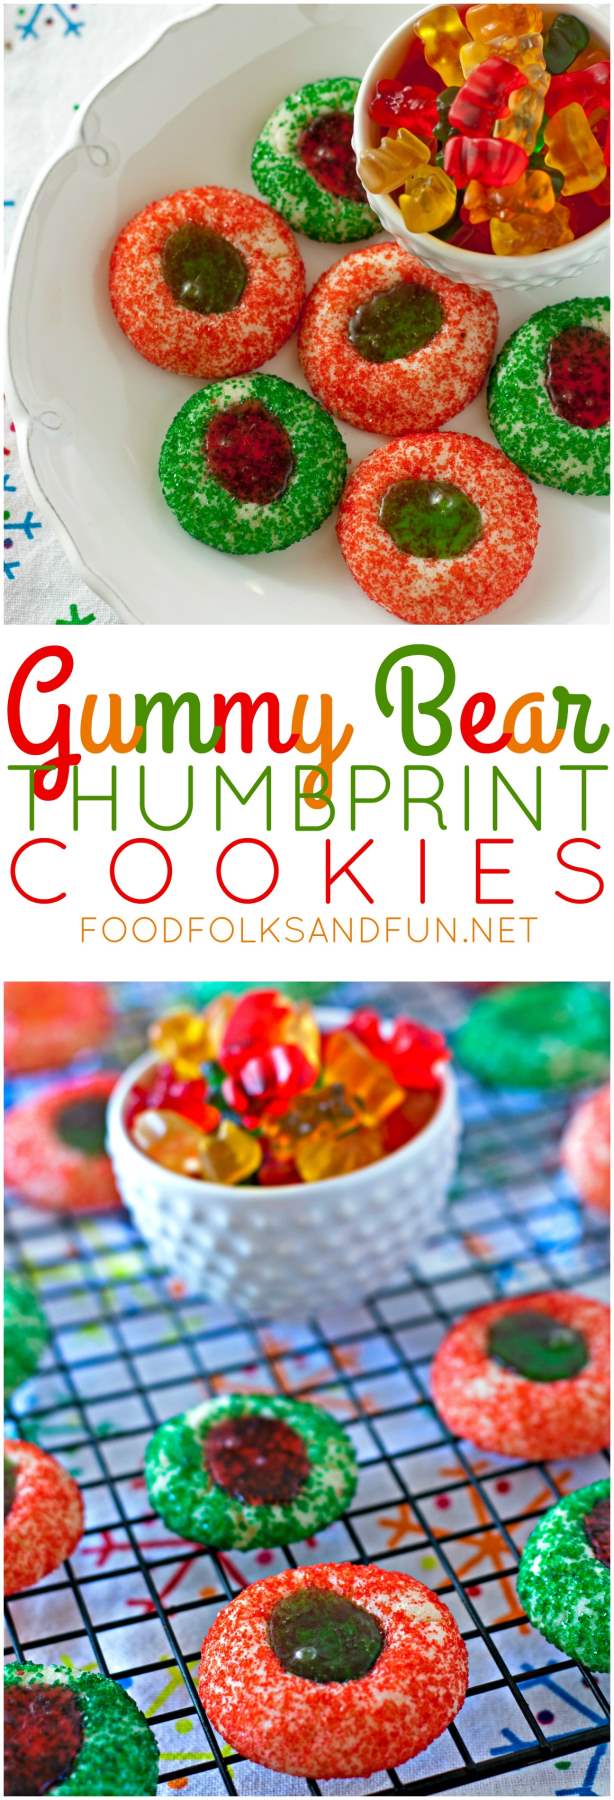 Gummy Bear Thumbprint Cookies with Text overlay for Pinterest